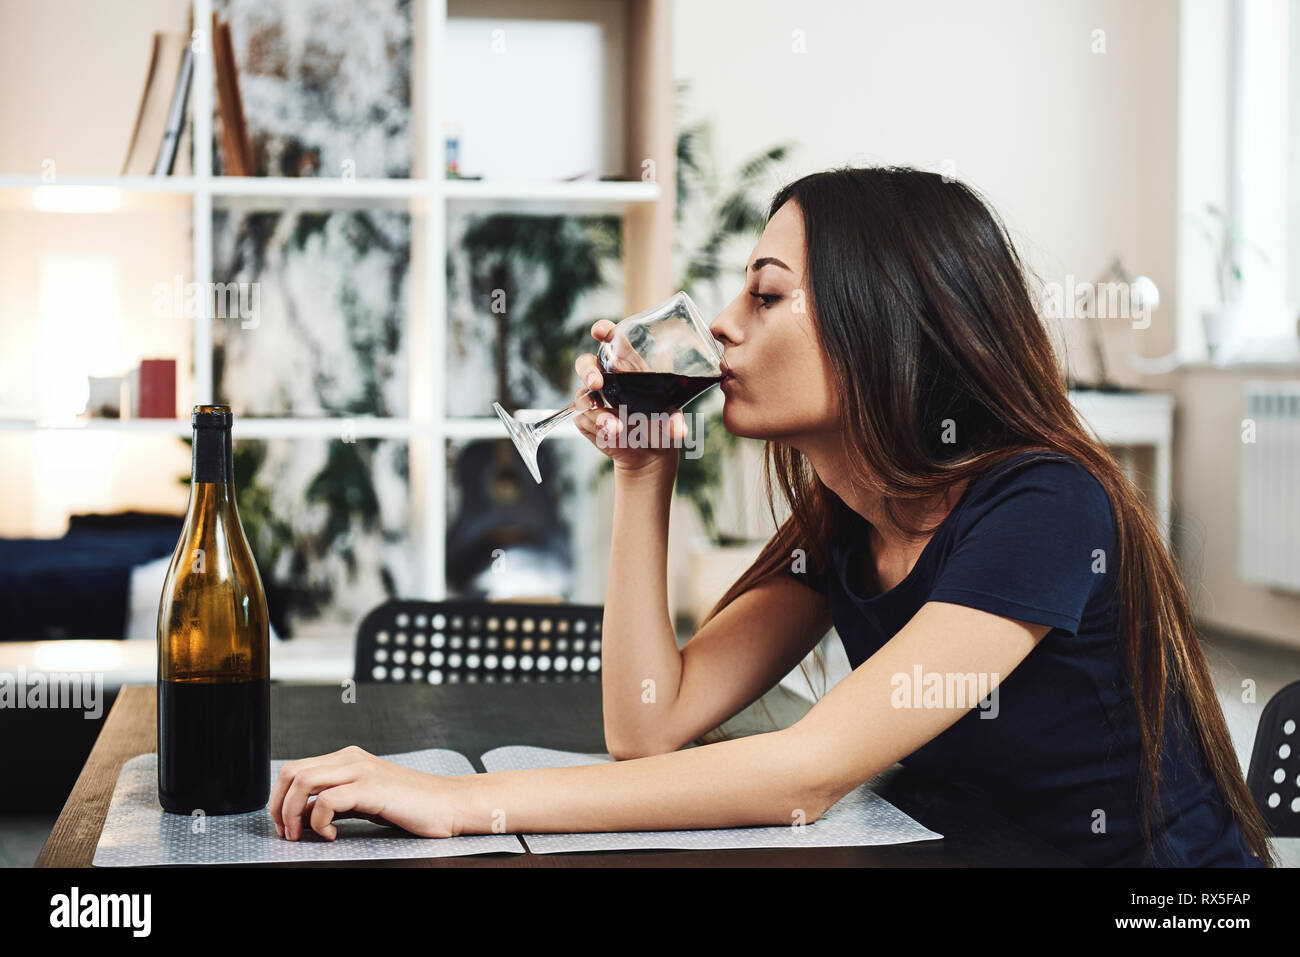 Depressed, divorced woman sitting alone at home and drinking a glass of red wine because of problems at work and troubles in relationships. Social and Stock Photo